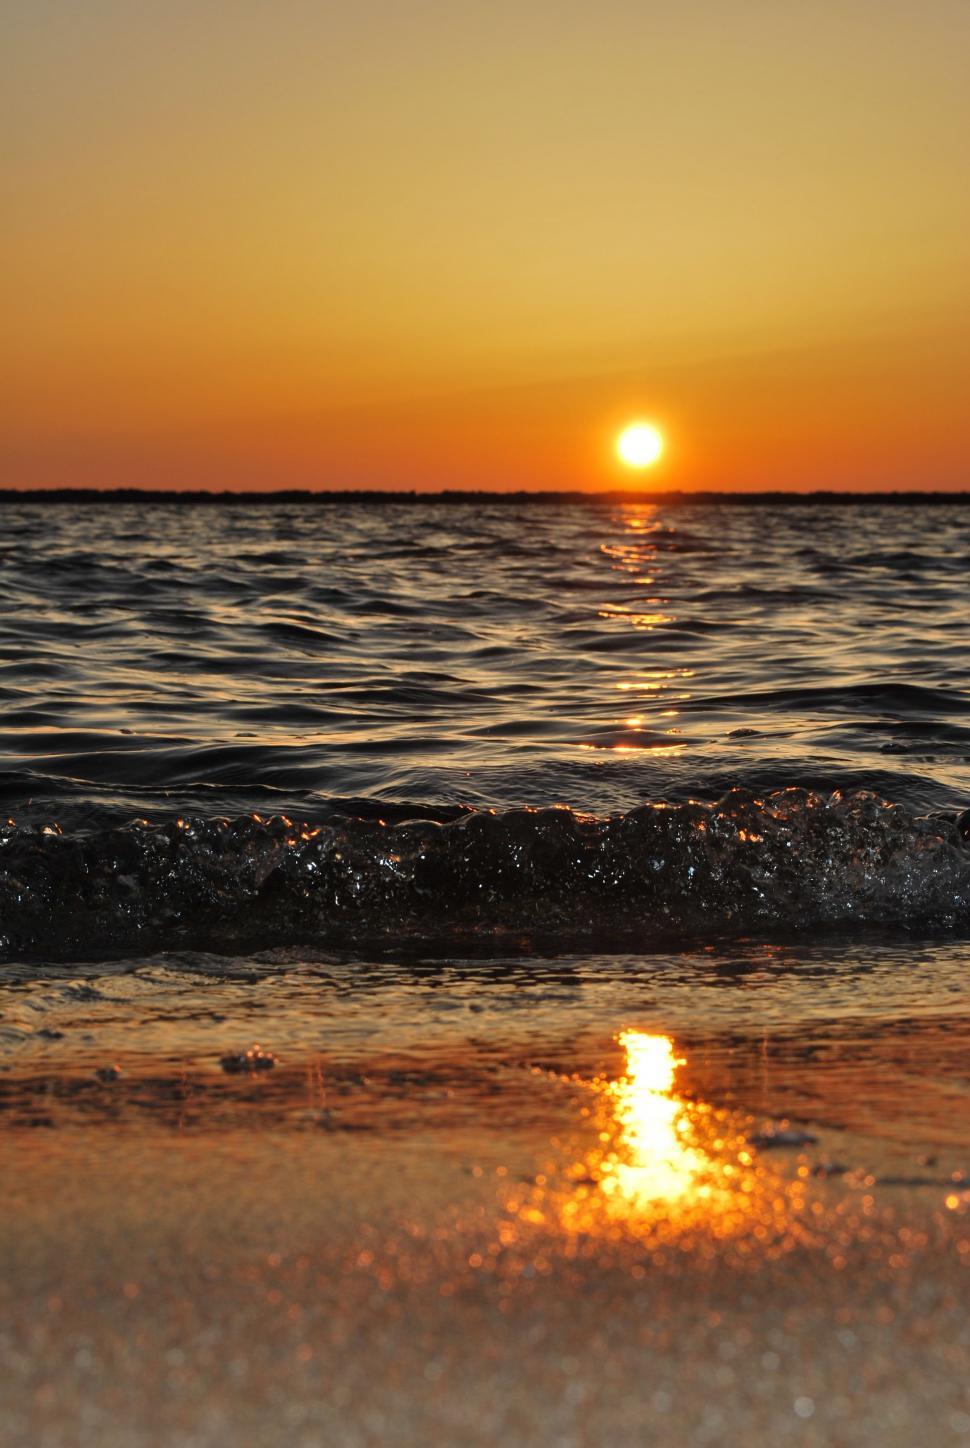 Free Image of Sun Setting Over Water at Beach 